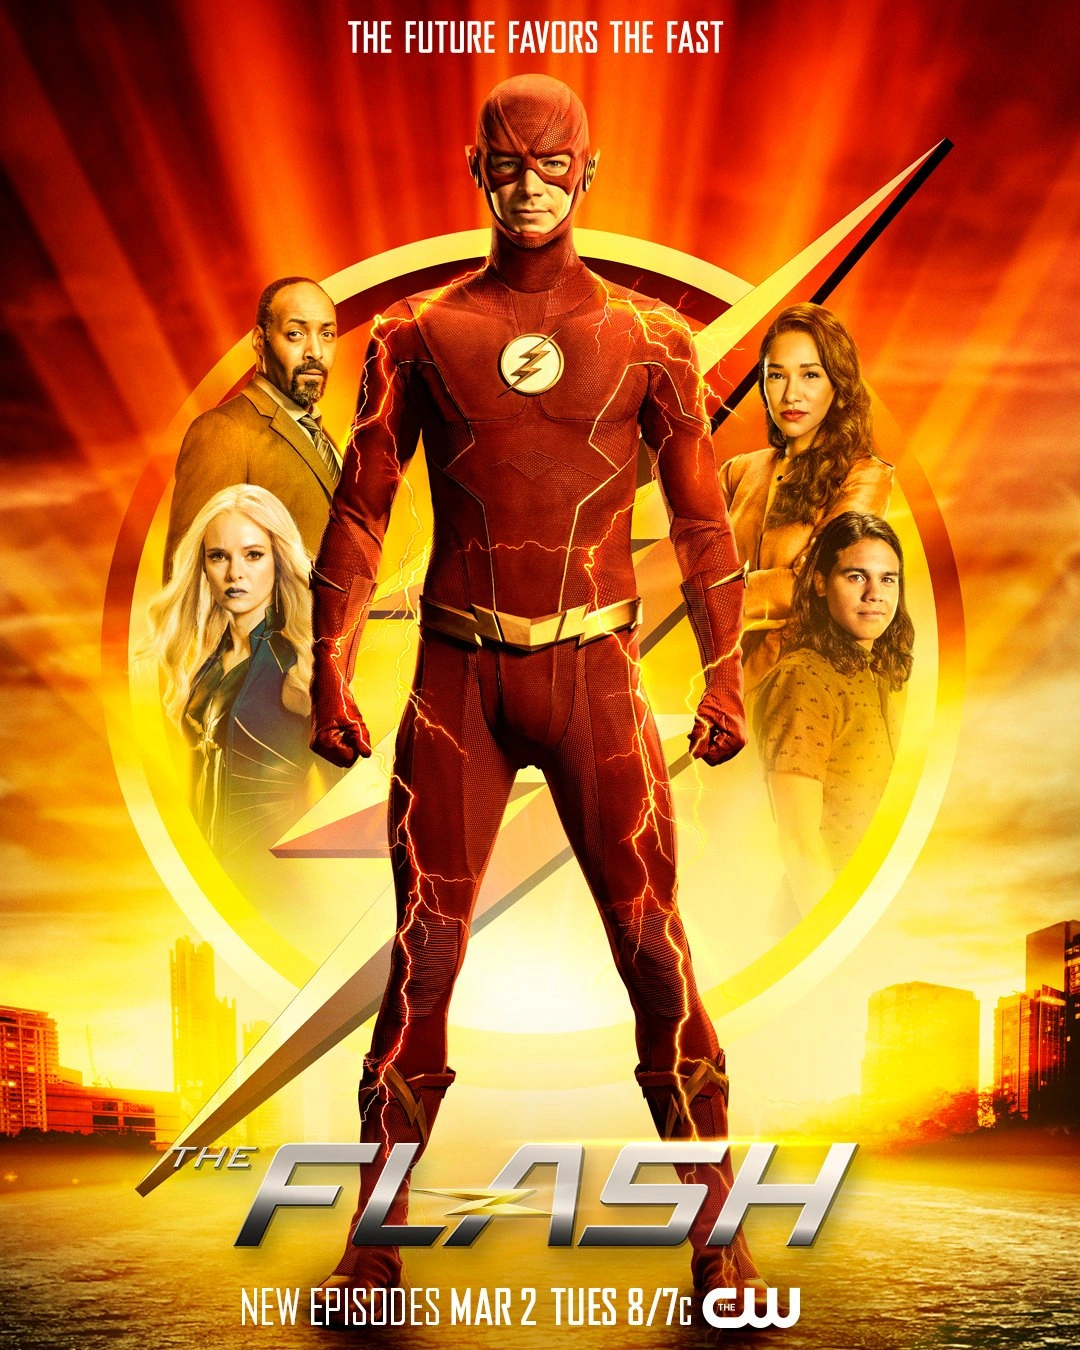 The Flash movie attracts the audience's attention